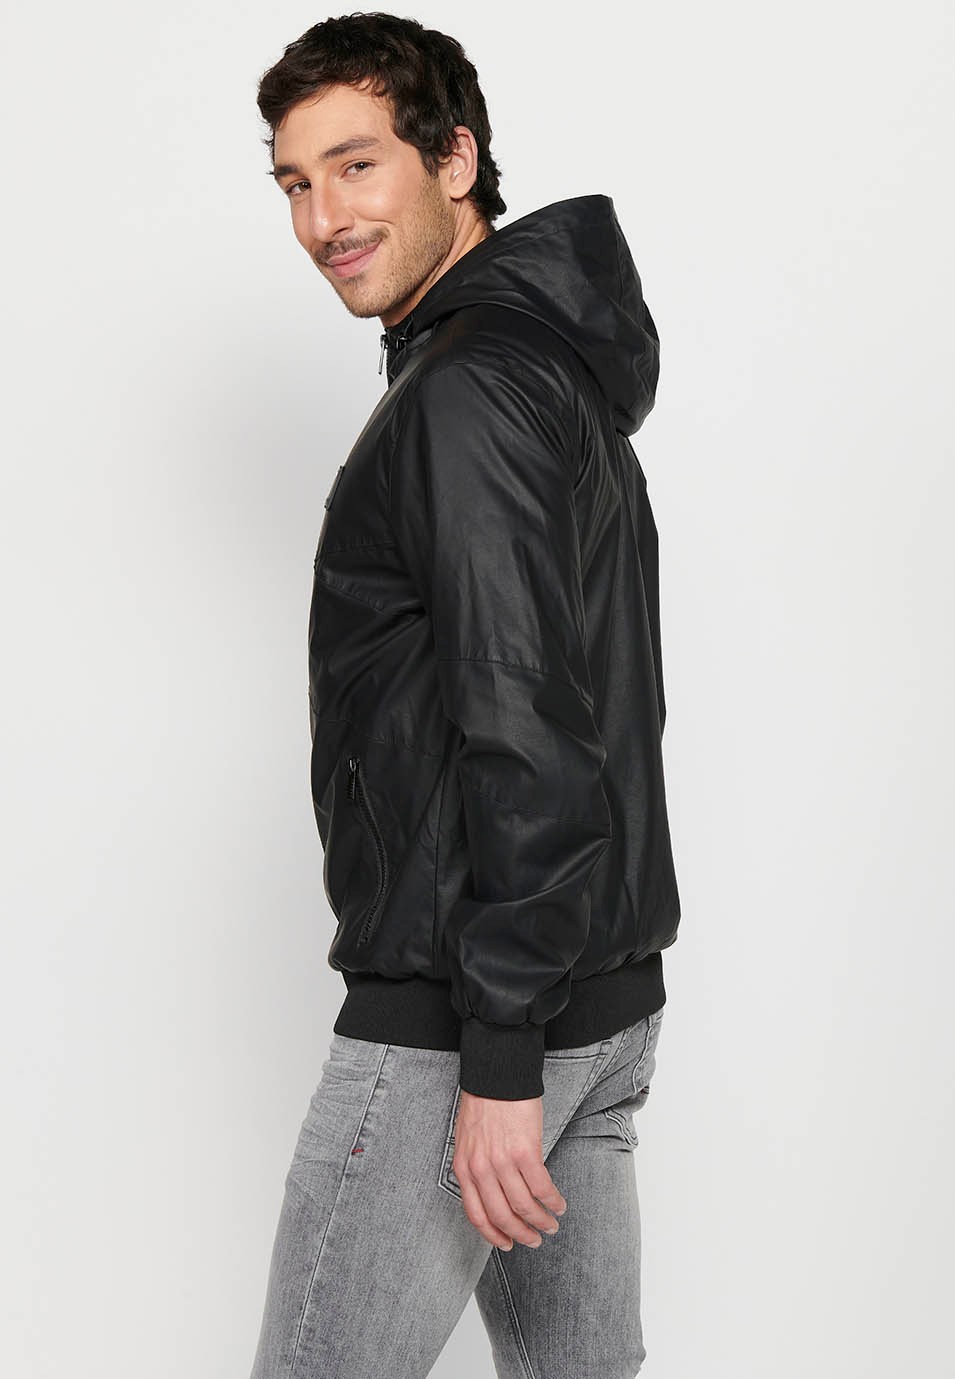 Leather-effect jacket with front zipper closure and hooded collar in black for Men 5